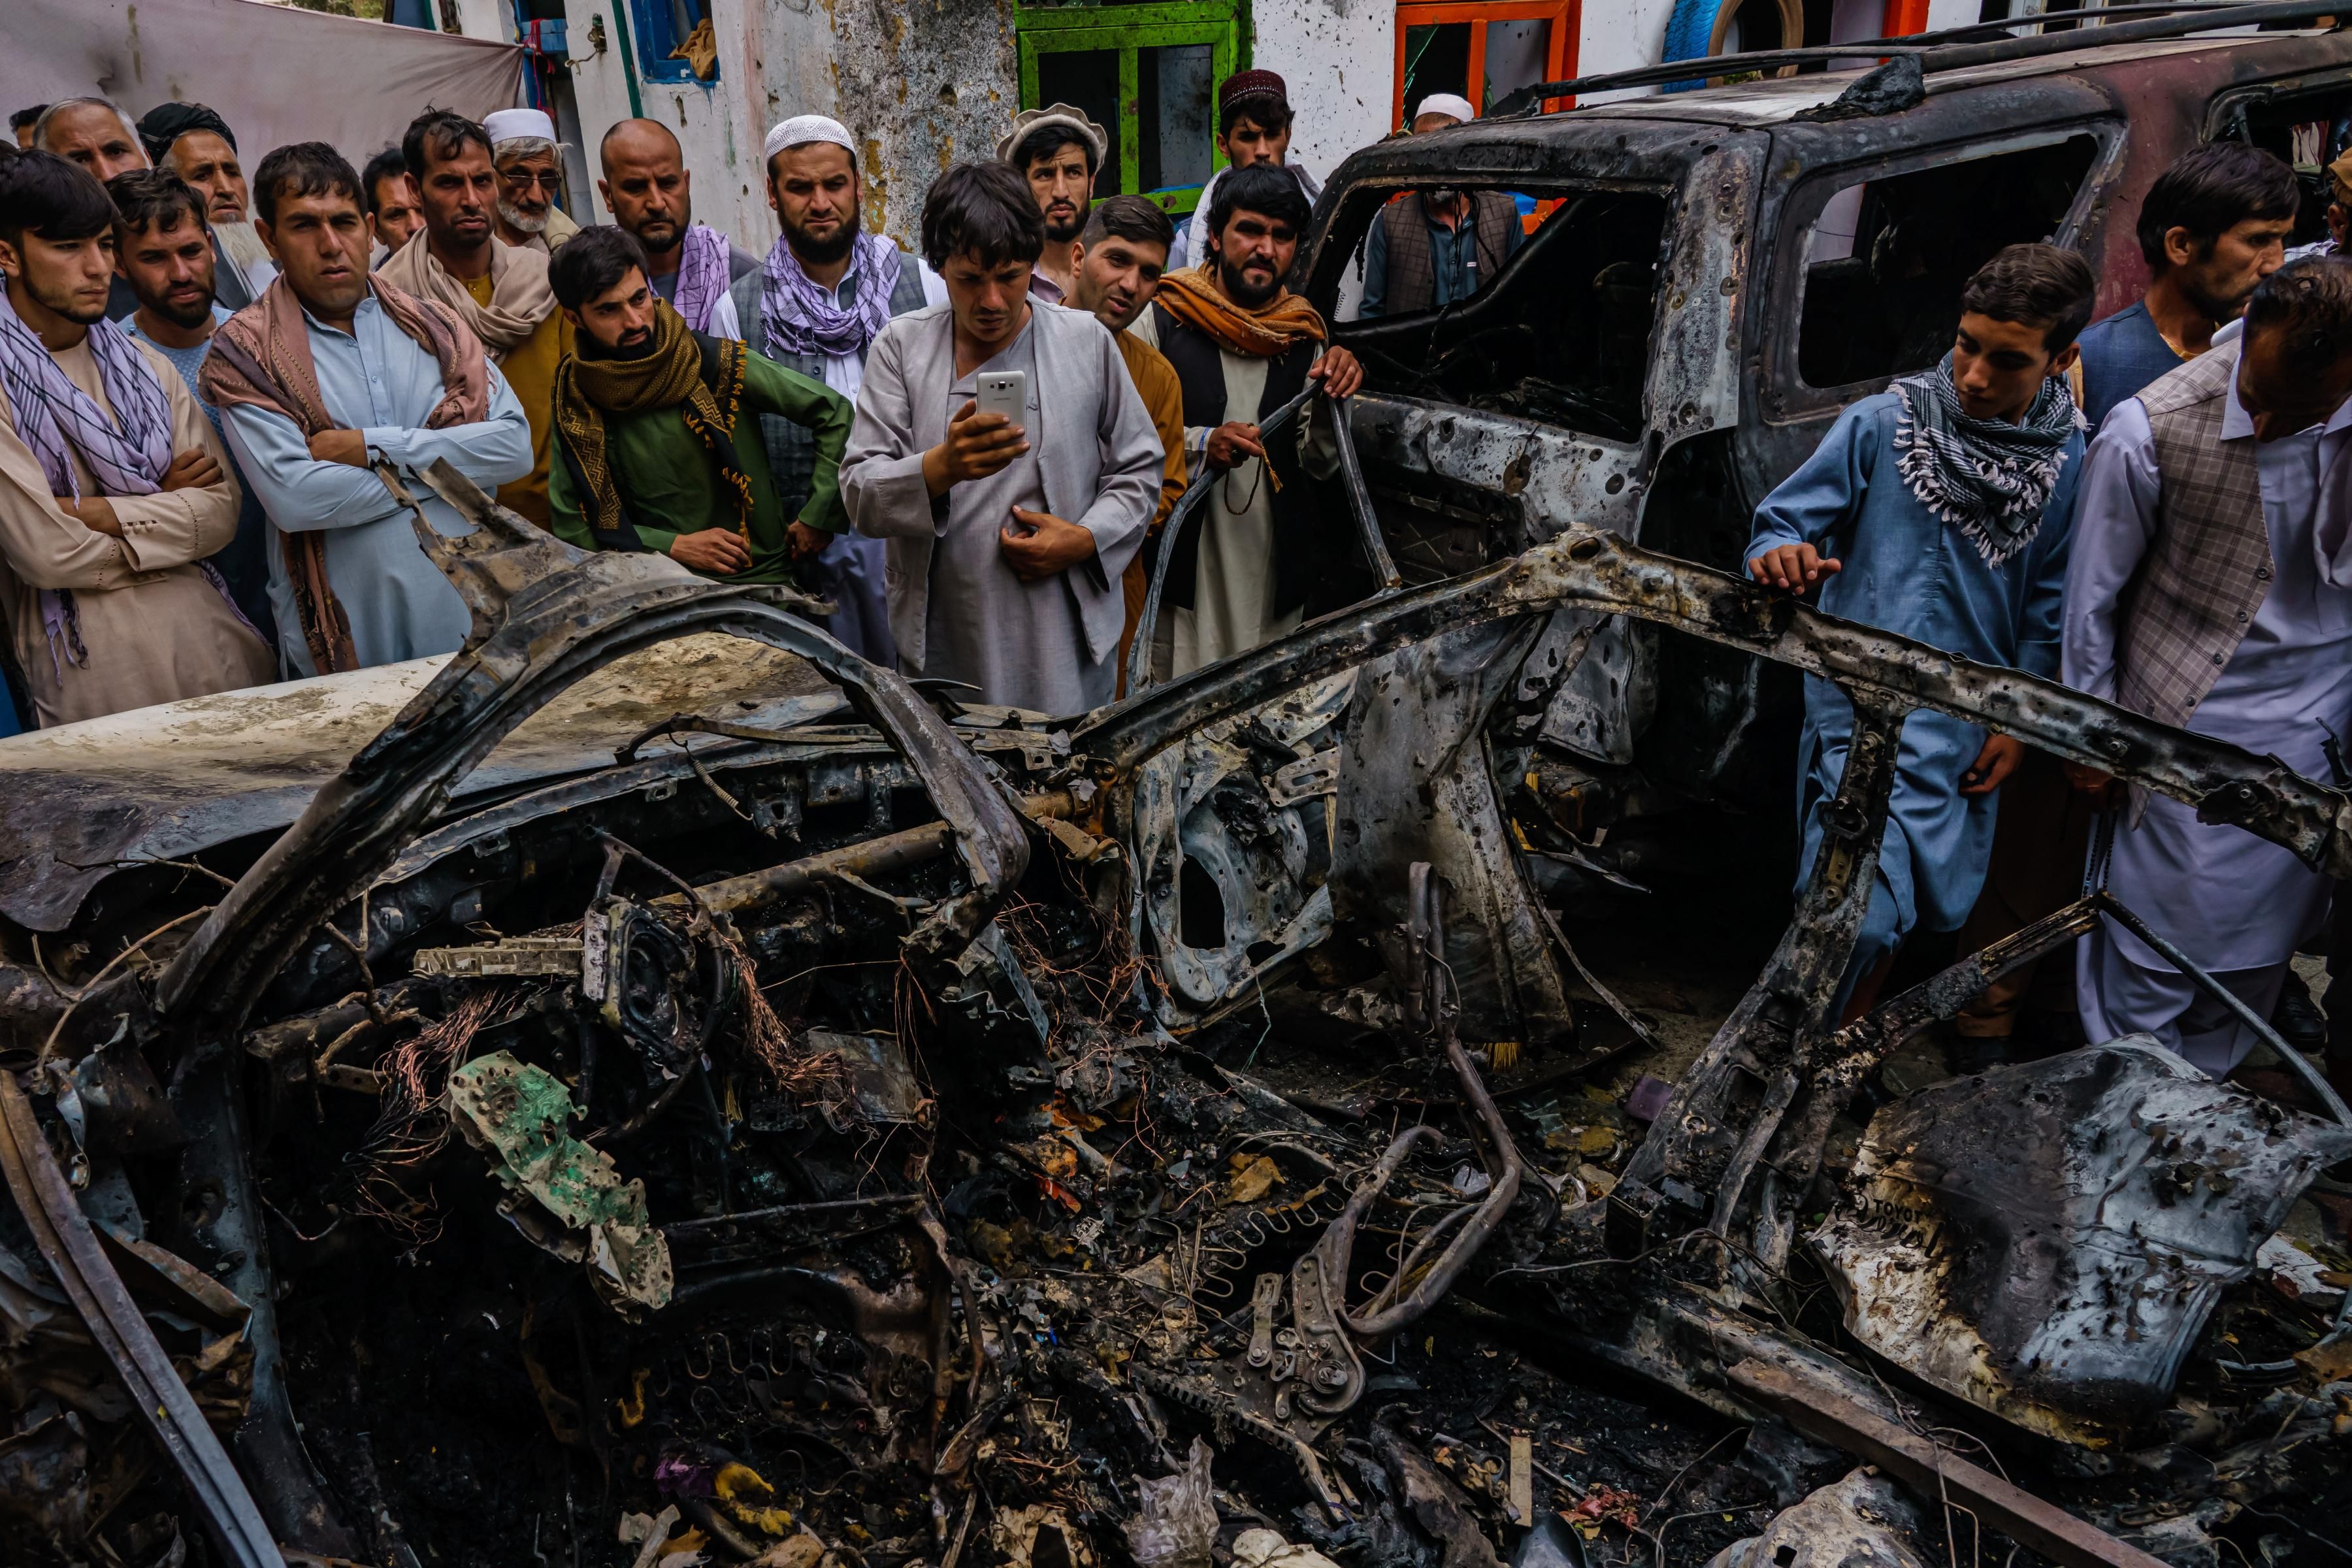 Afghans gather around a car incinerated by a U.S. drone strike